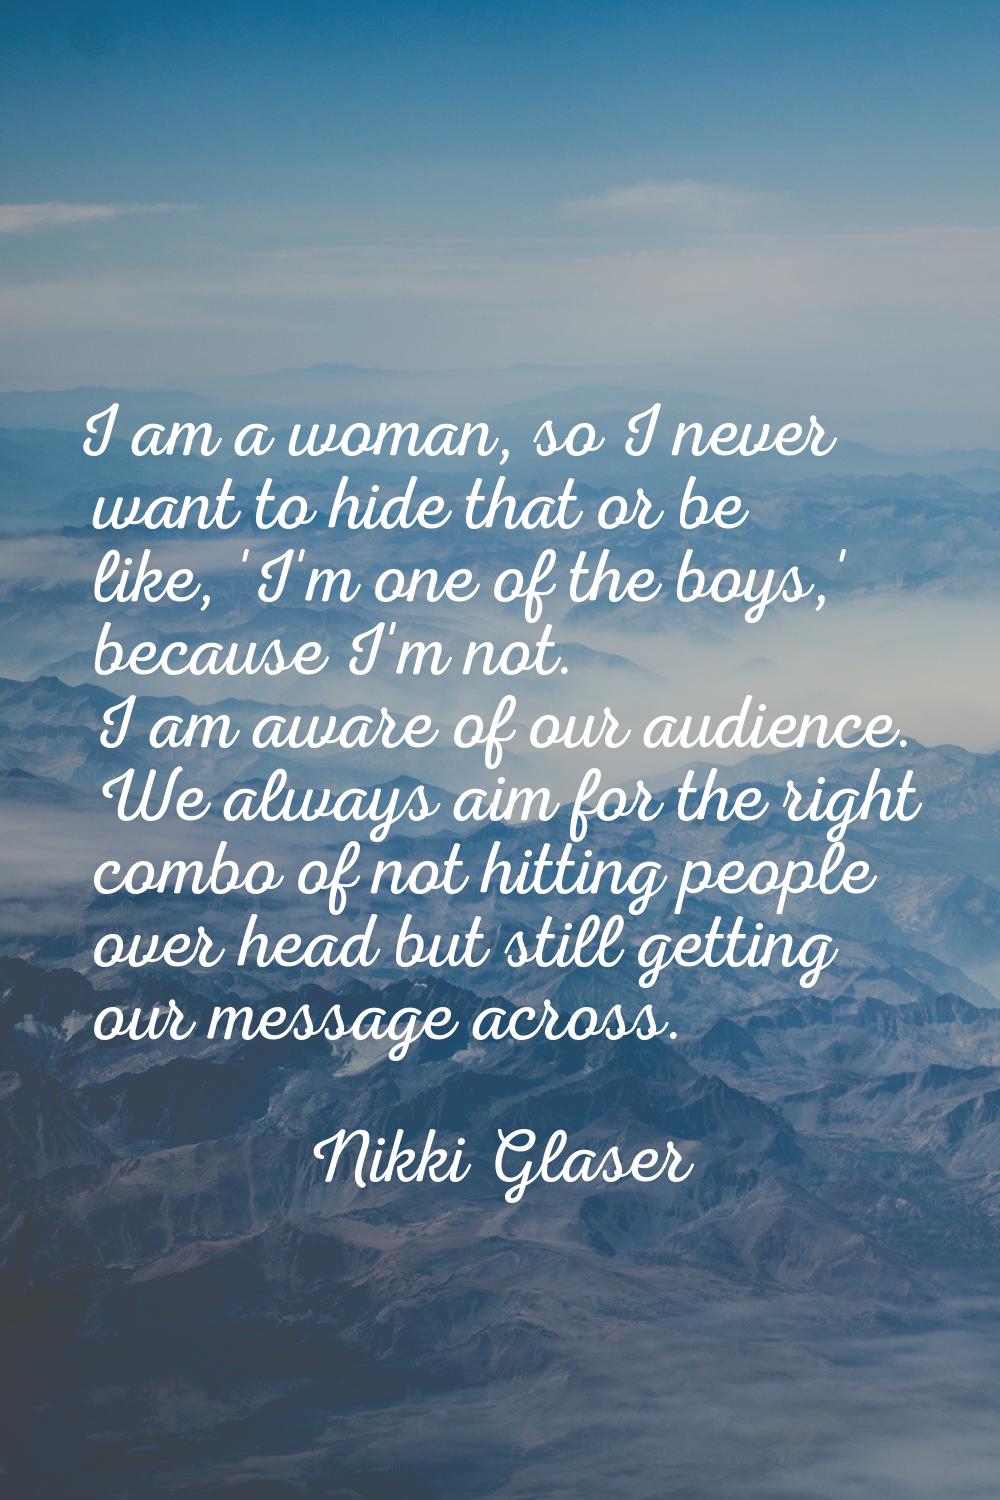 I am a woman, so I never want to hide that or be like, 'I'm one of the boys,' because I'm not. I am